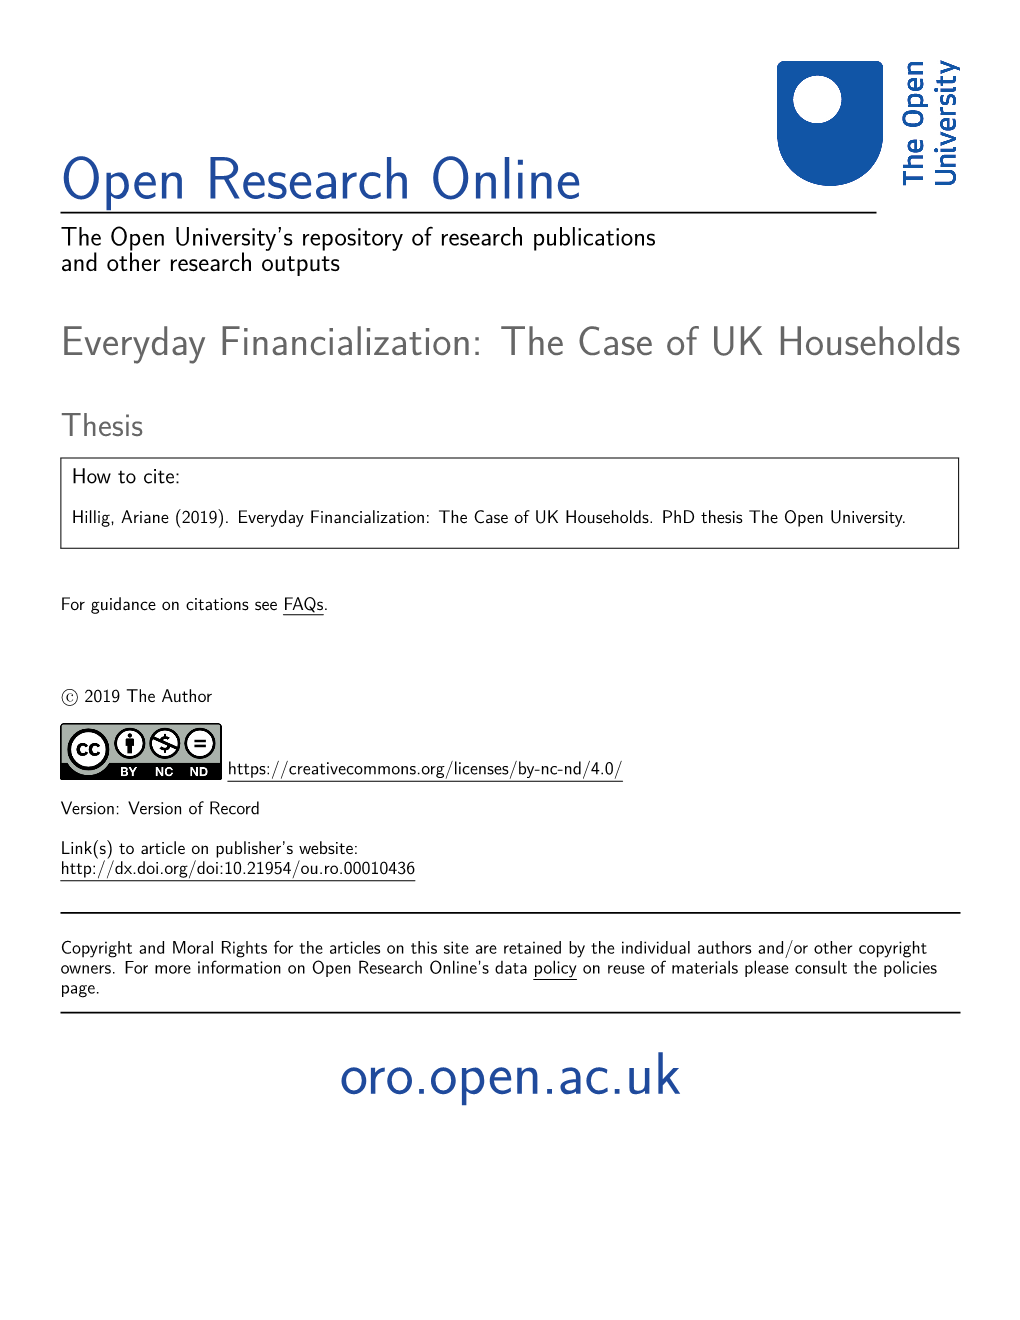 Everyday Financialization: the Case of UK Households